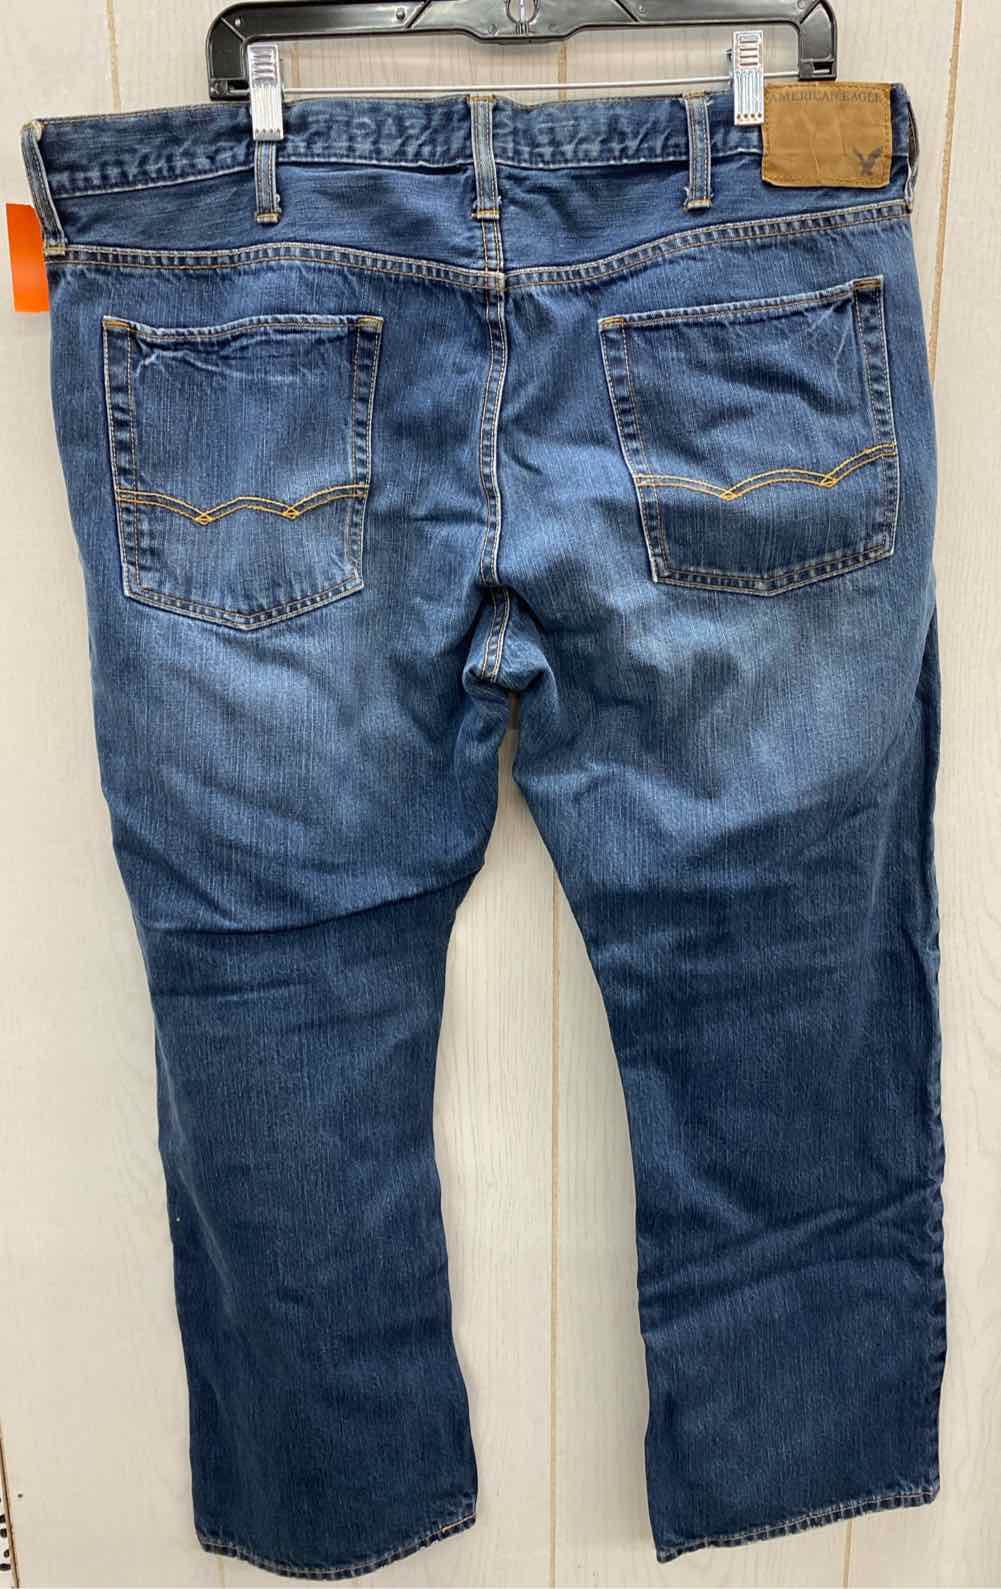 American Eagle Size 38/30 Mens Jeans